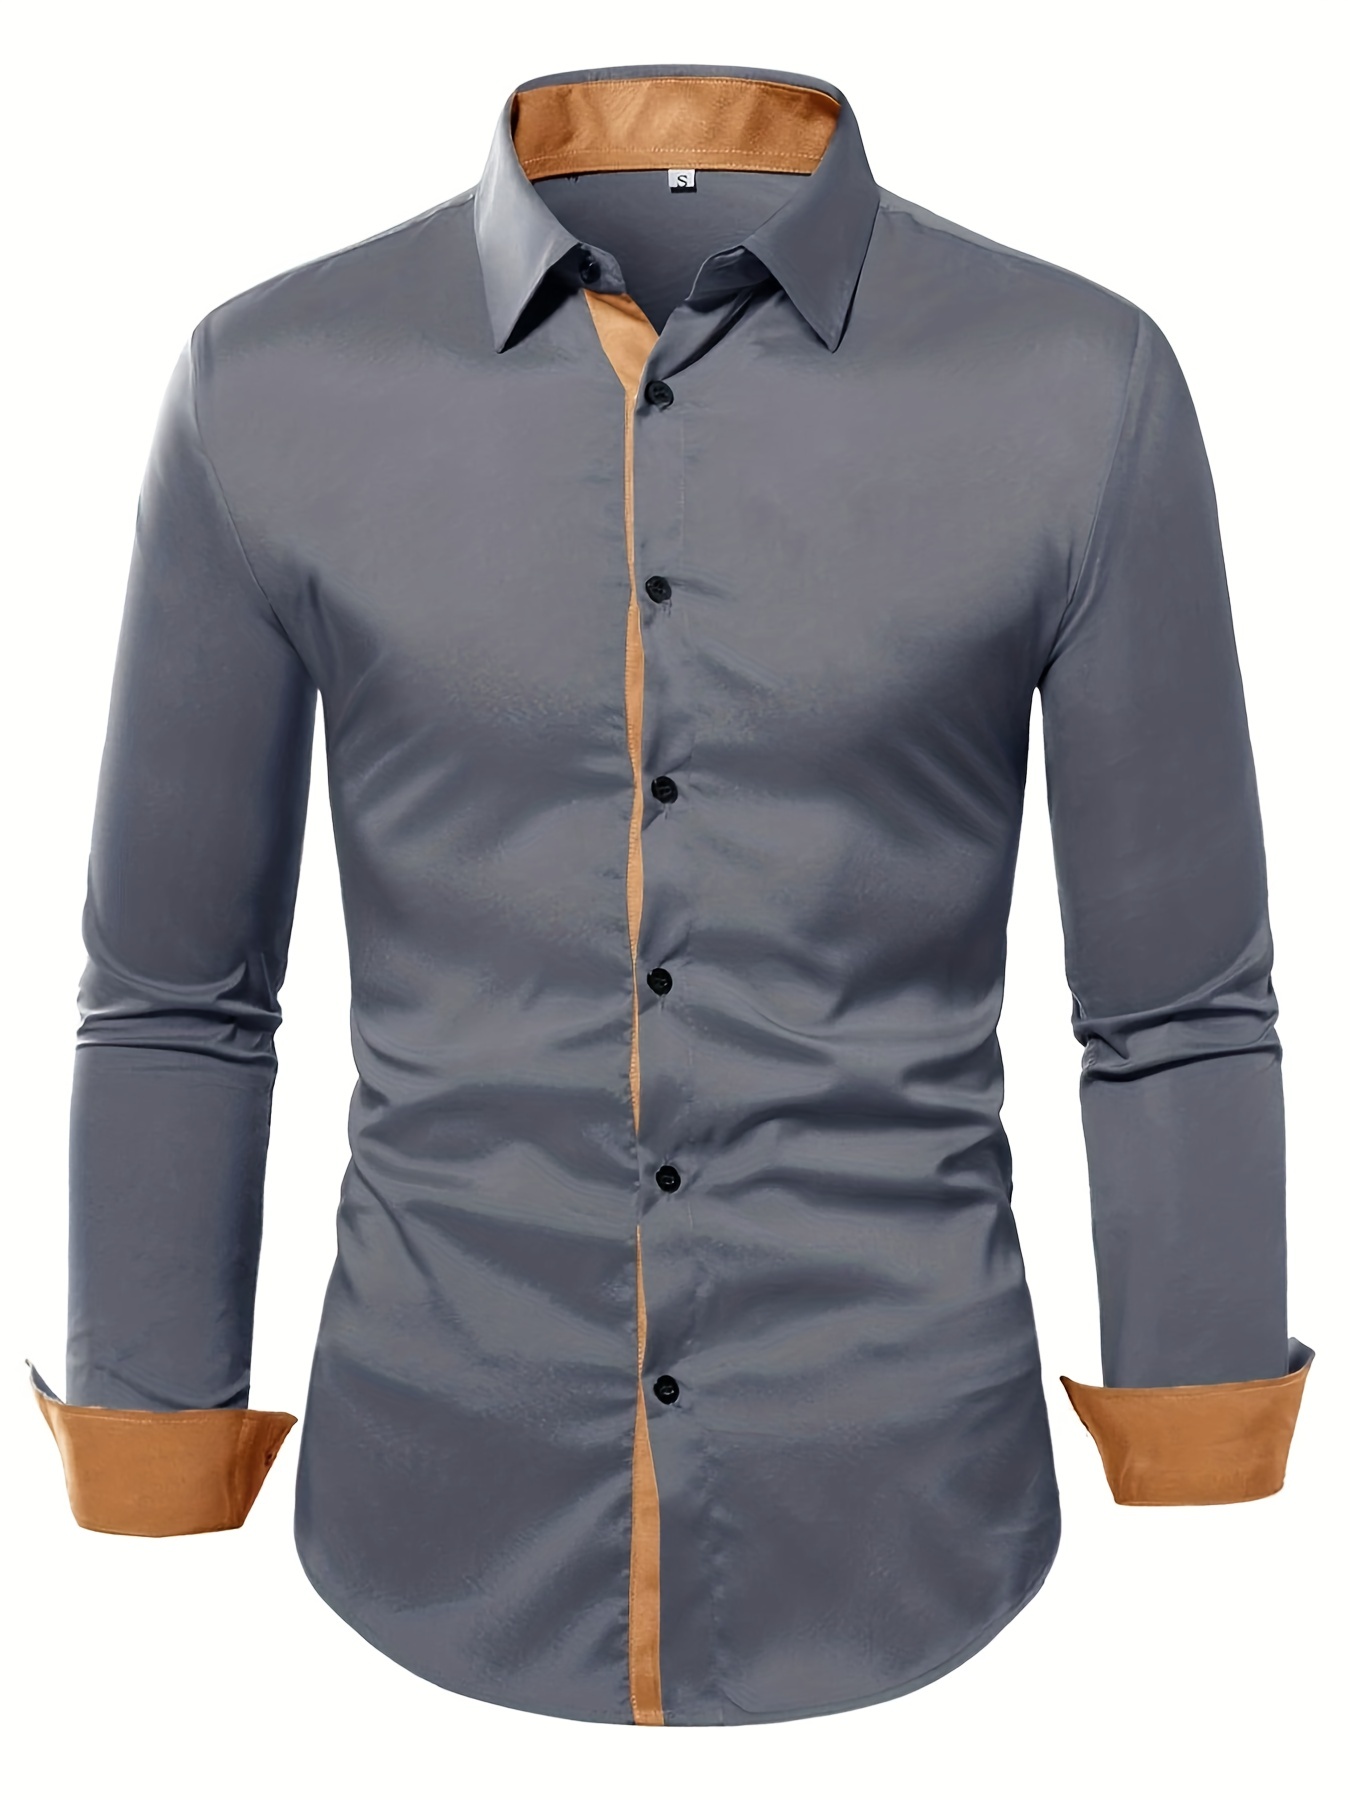 Men's Shirts  Formal, Occasion & Casual Shirts for Men